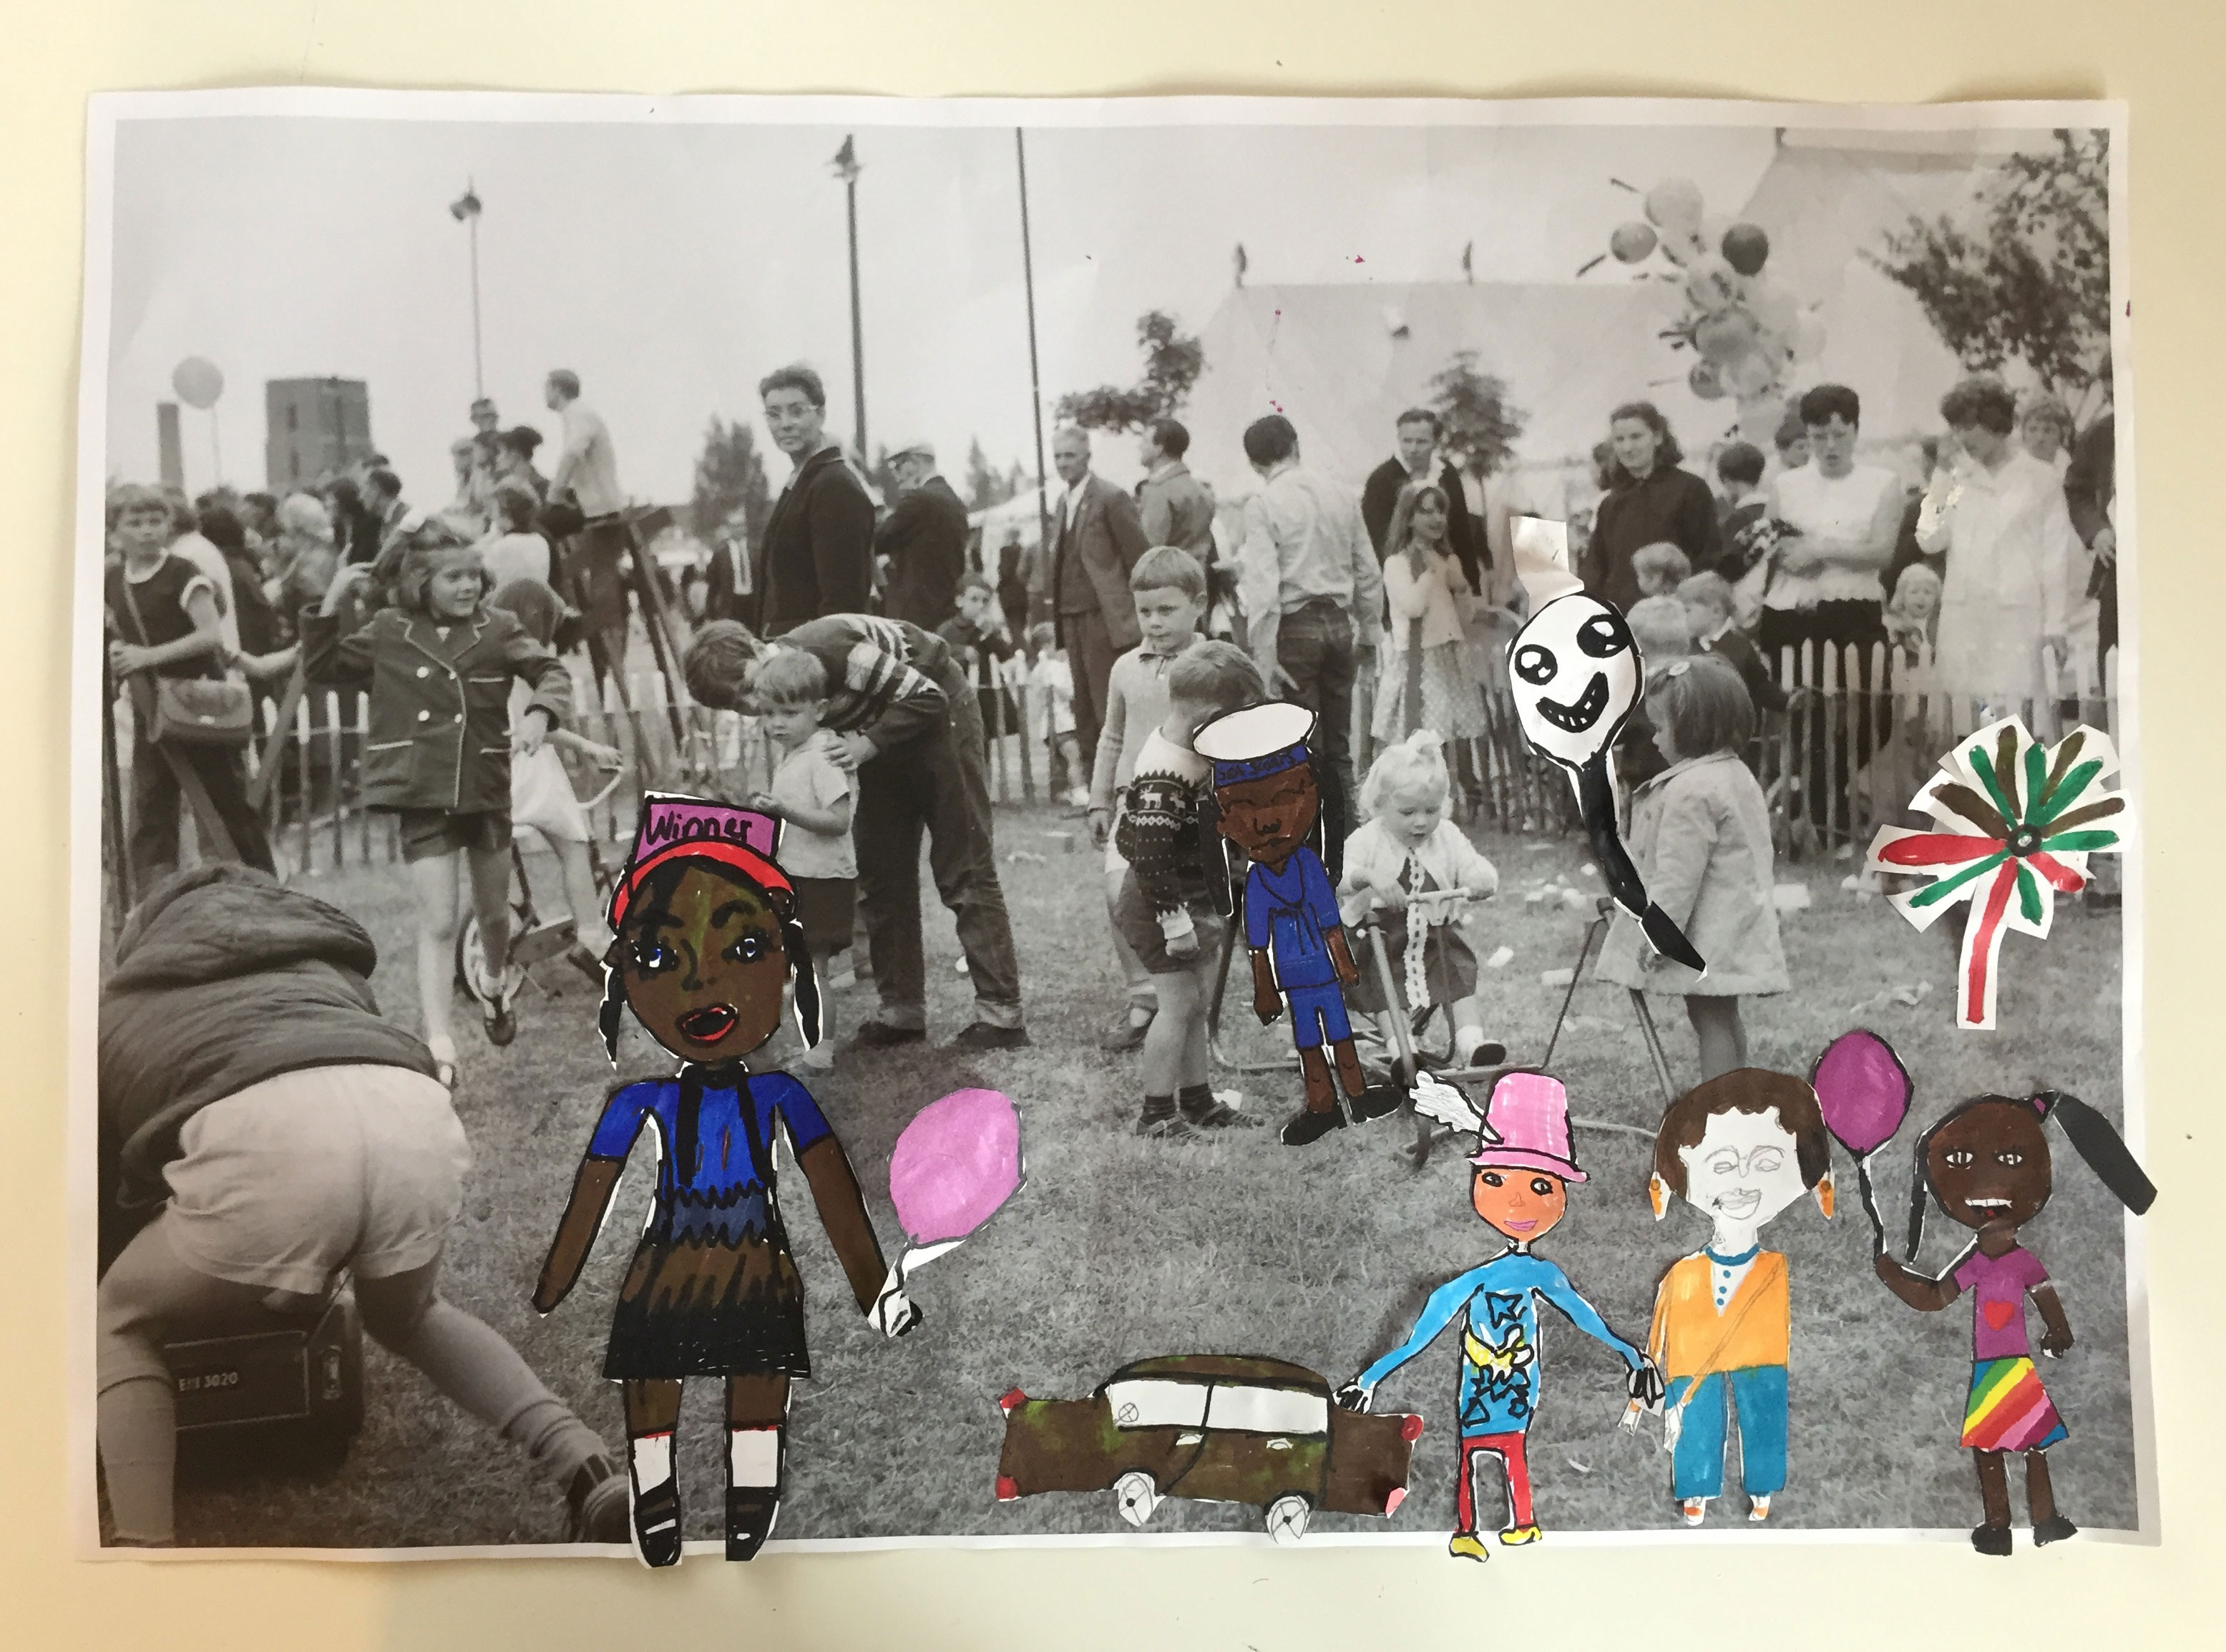 A collage of people and shapes drawn by the participants and placed on top of an old black and white photograph of a group of people socialising and playing